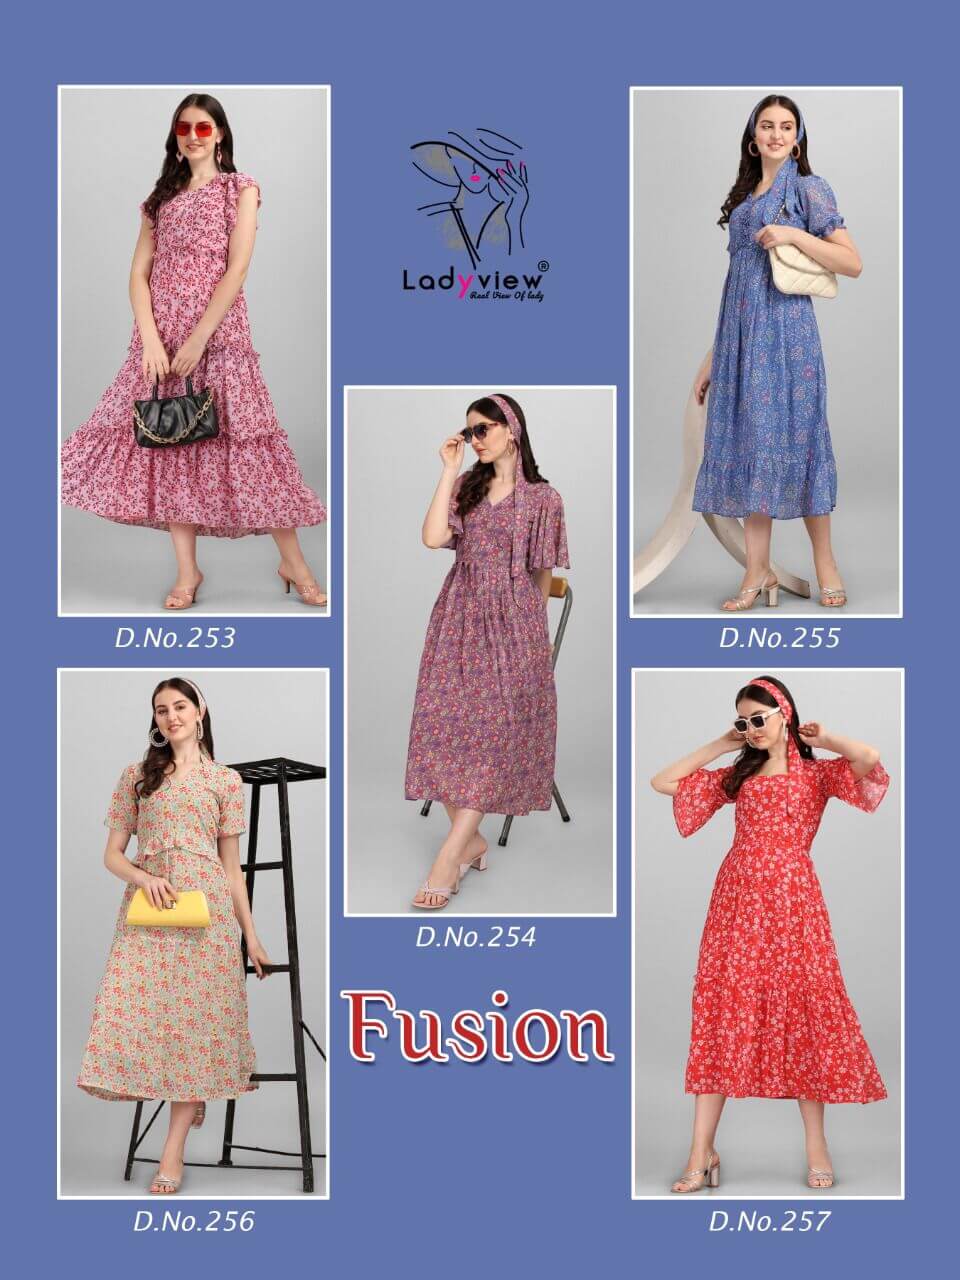 Ladyview Fusion One Piece Dress Wholesale Catalog, Purchase Ladyview One Piece Dress Full Catalog at Wholesale Price Online 